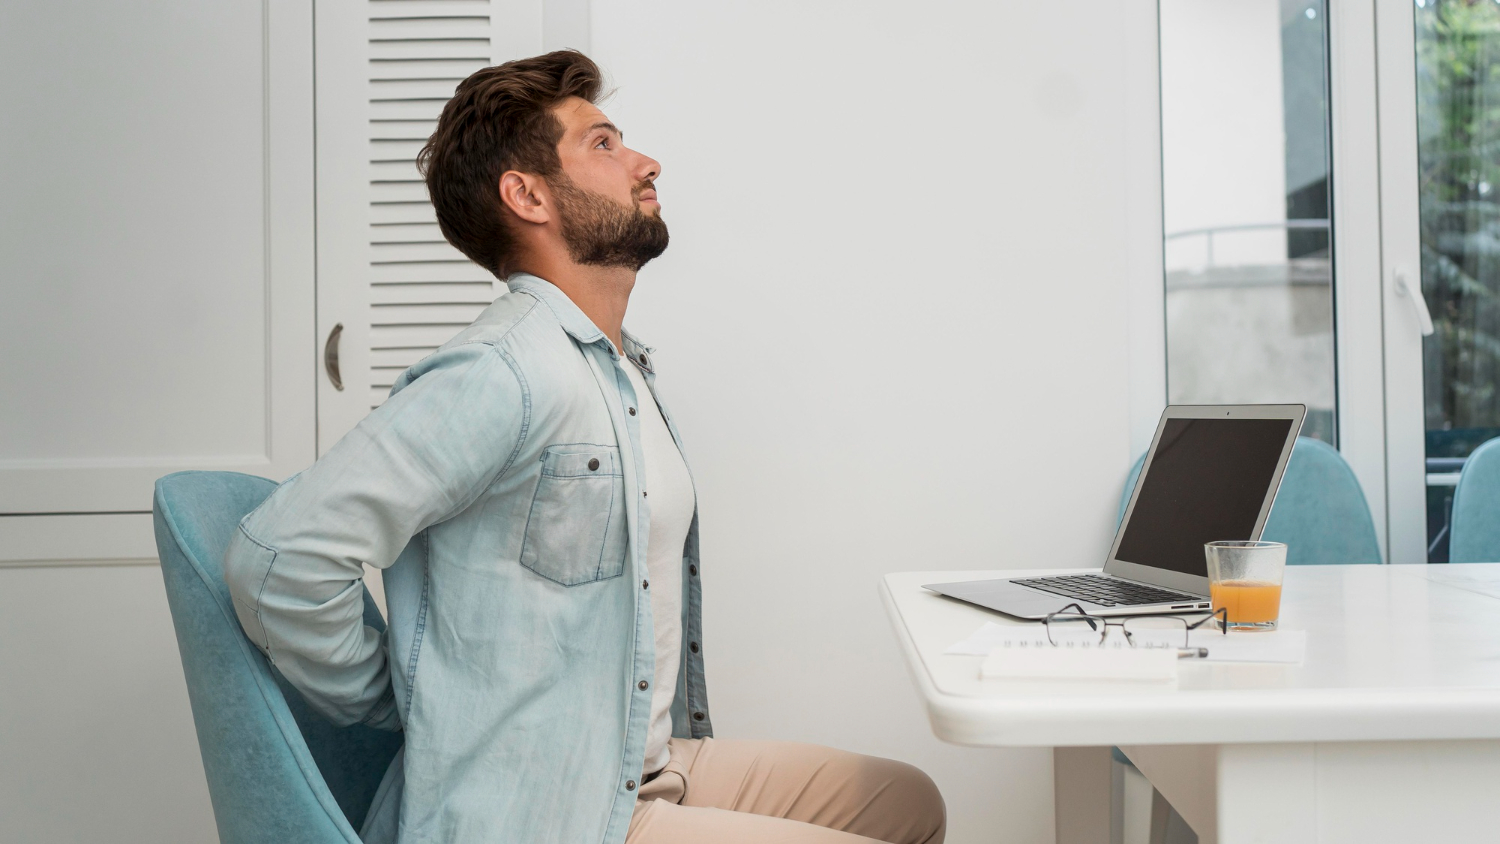 How To Improve Your Posture For Better Health